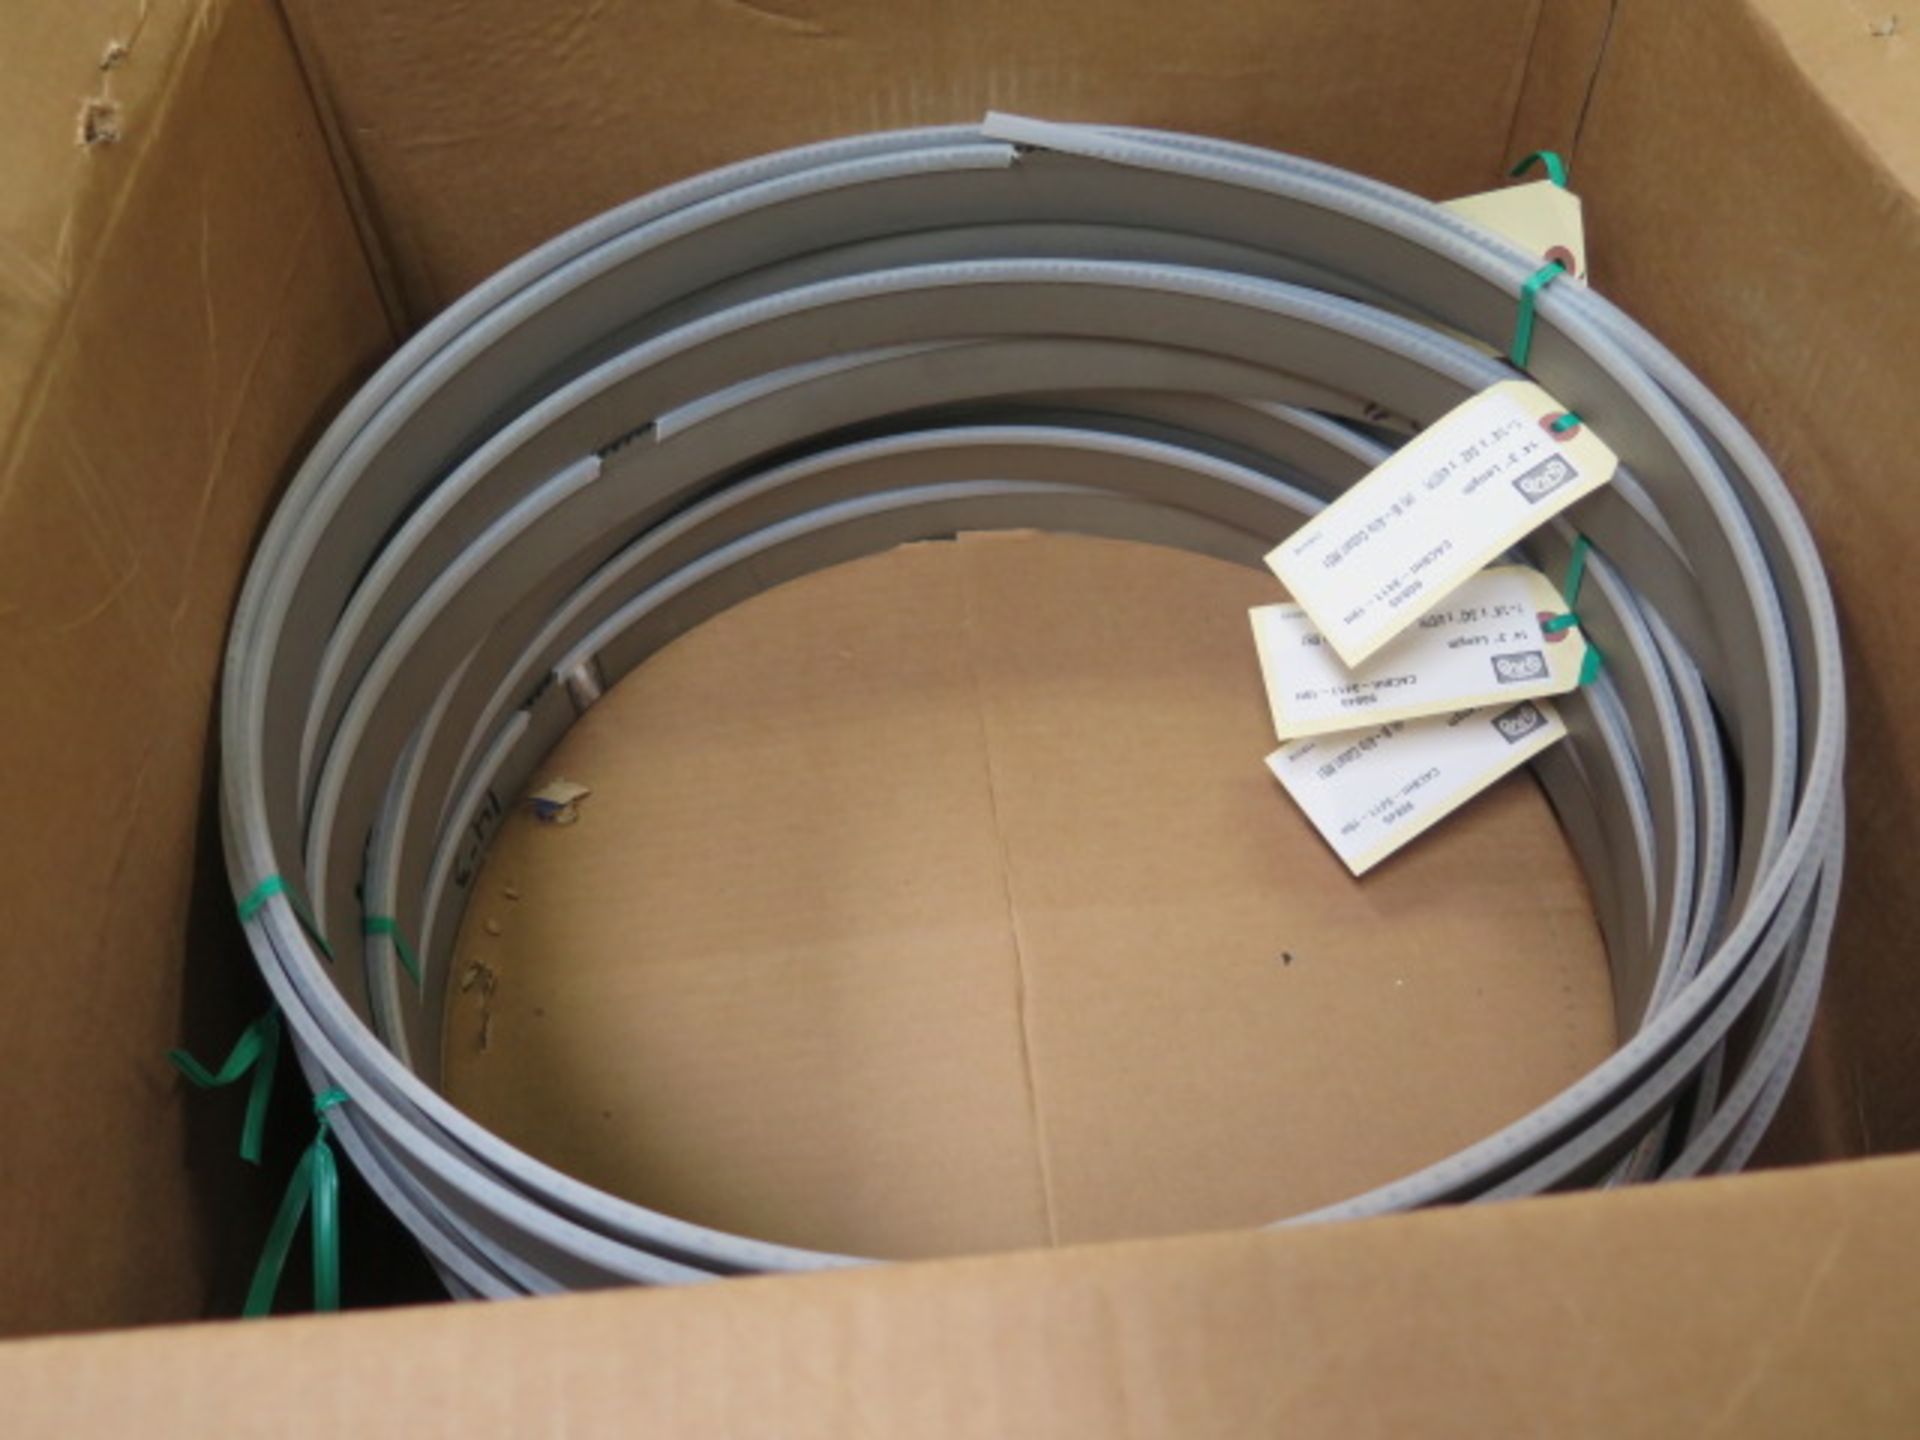 Band Saw Blades (2-Boxes) - Image 2 of 3